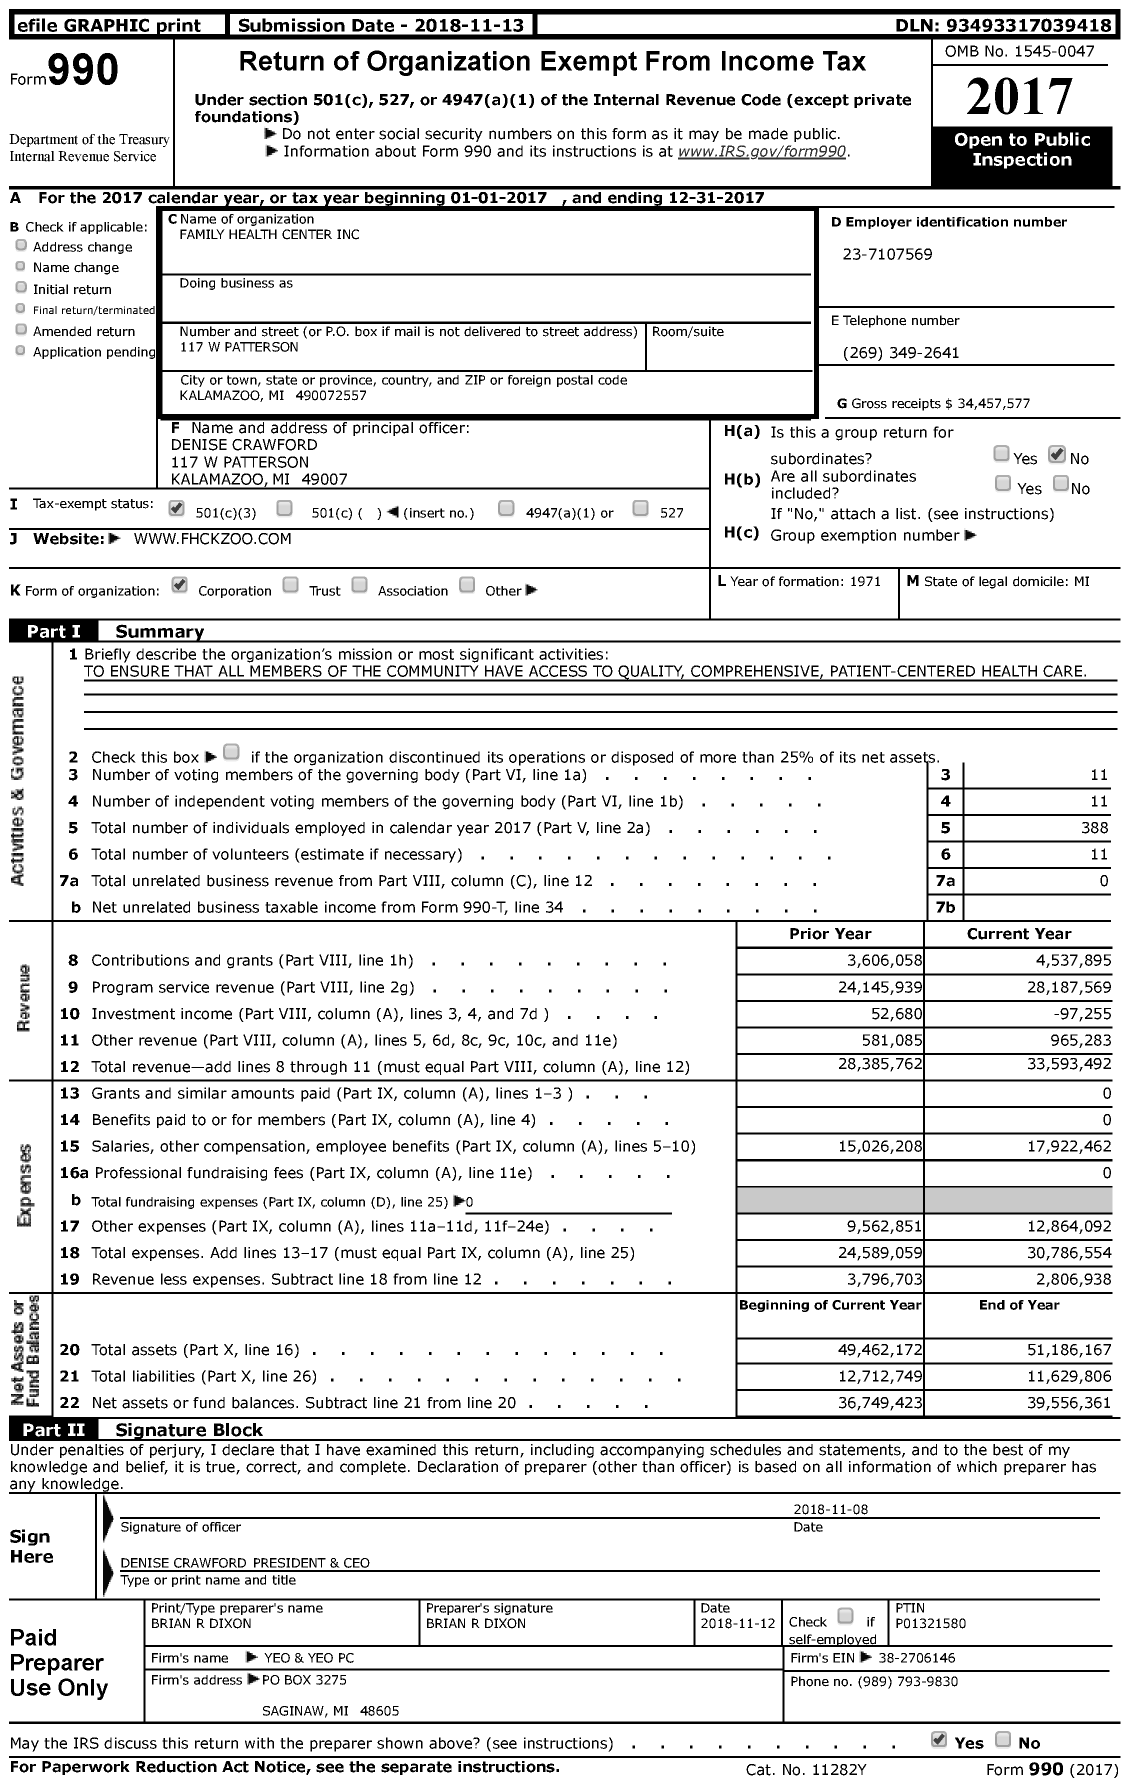 Image of first page of 2017 Form 990 for Family Health Center (FHC)